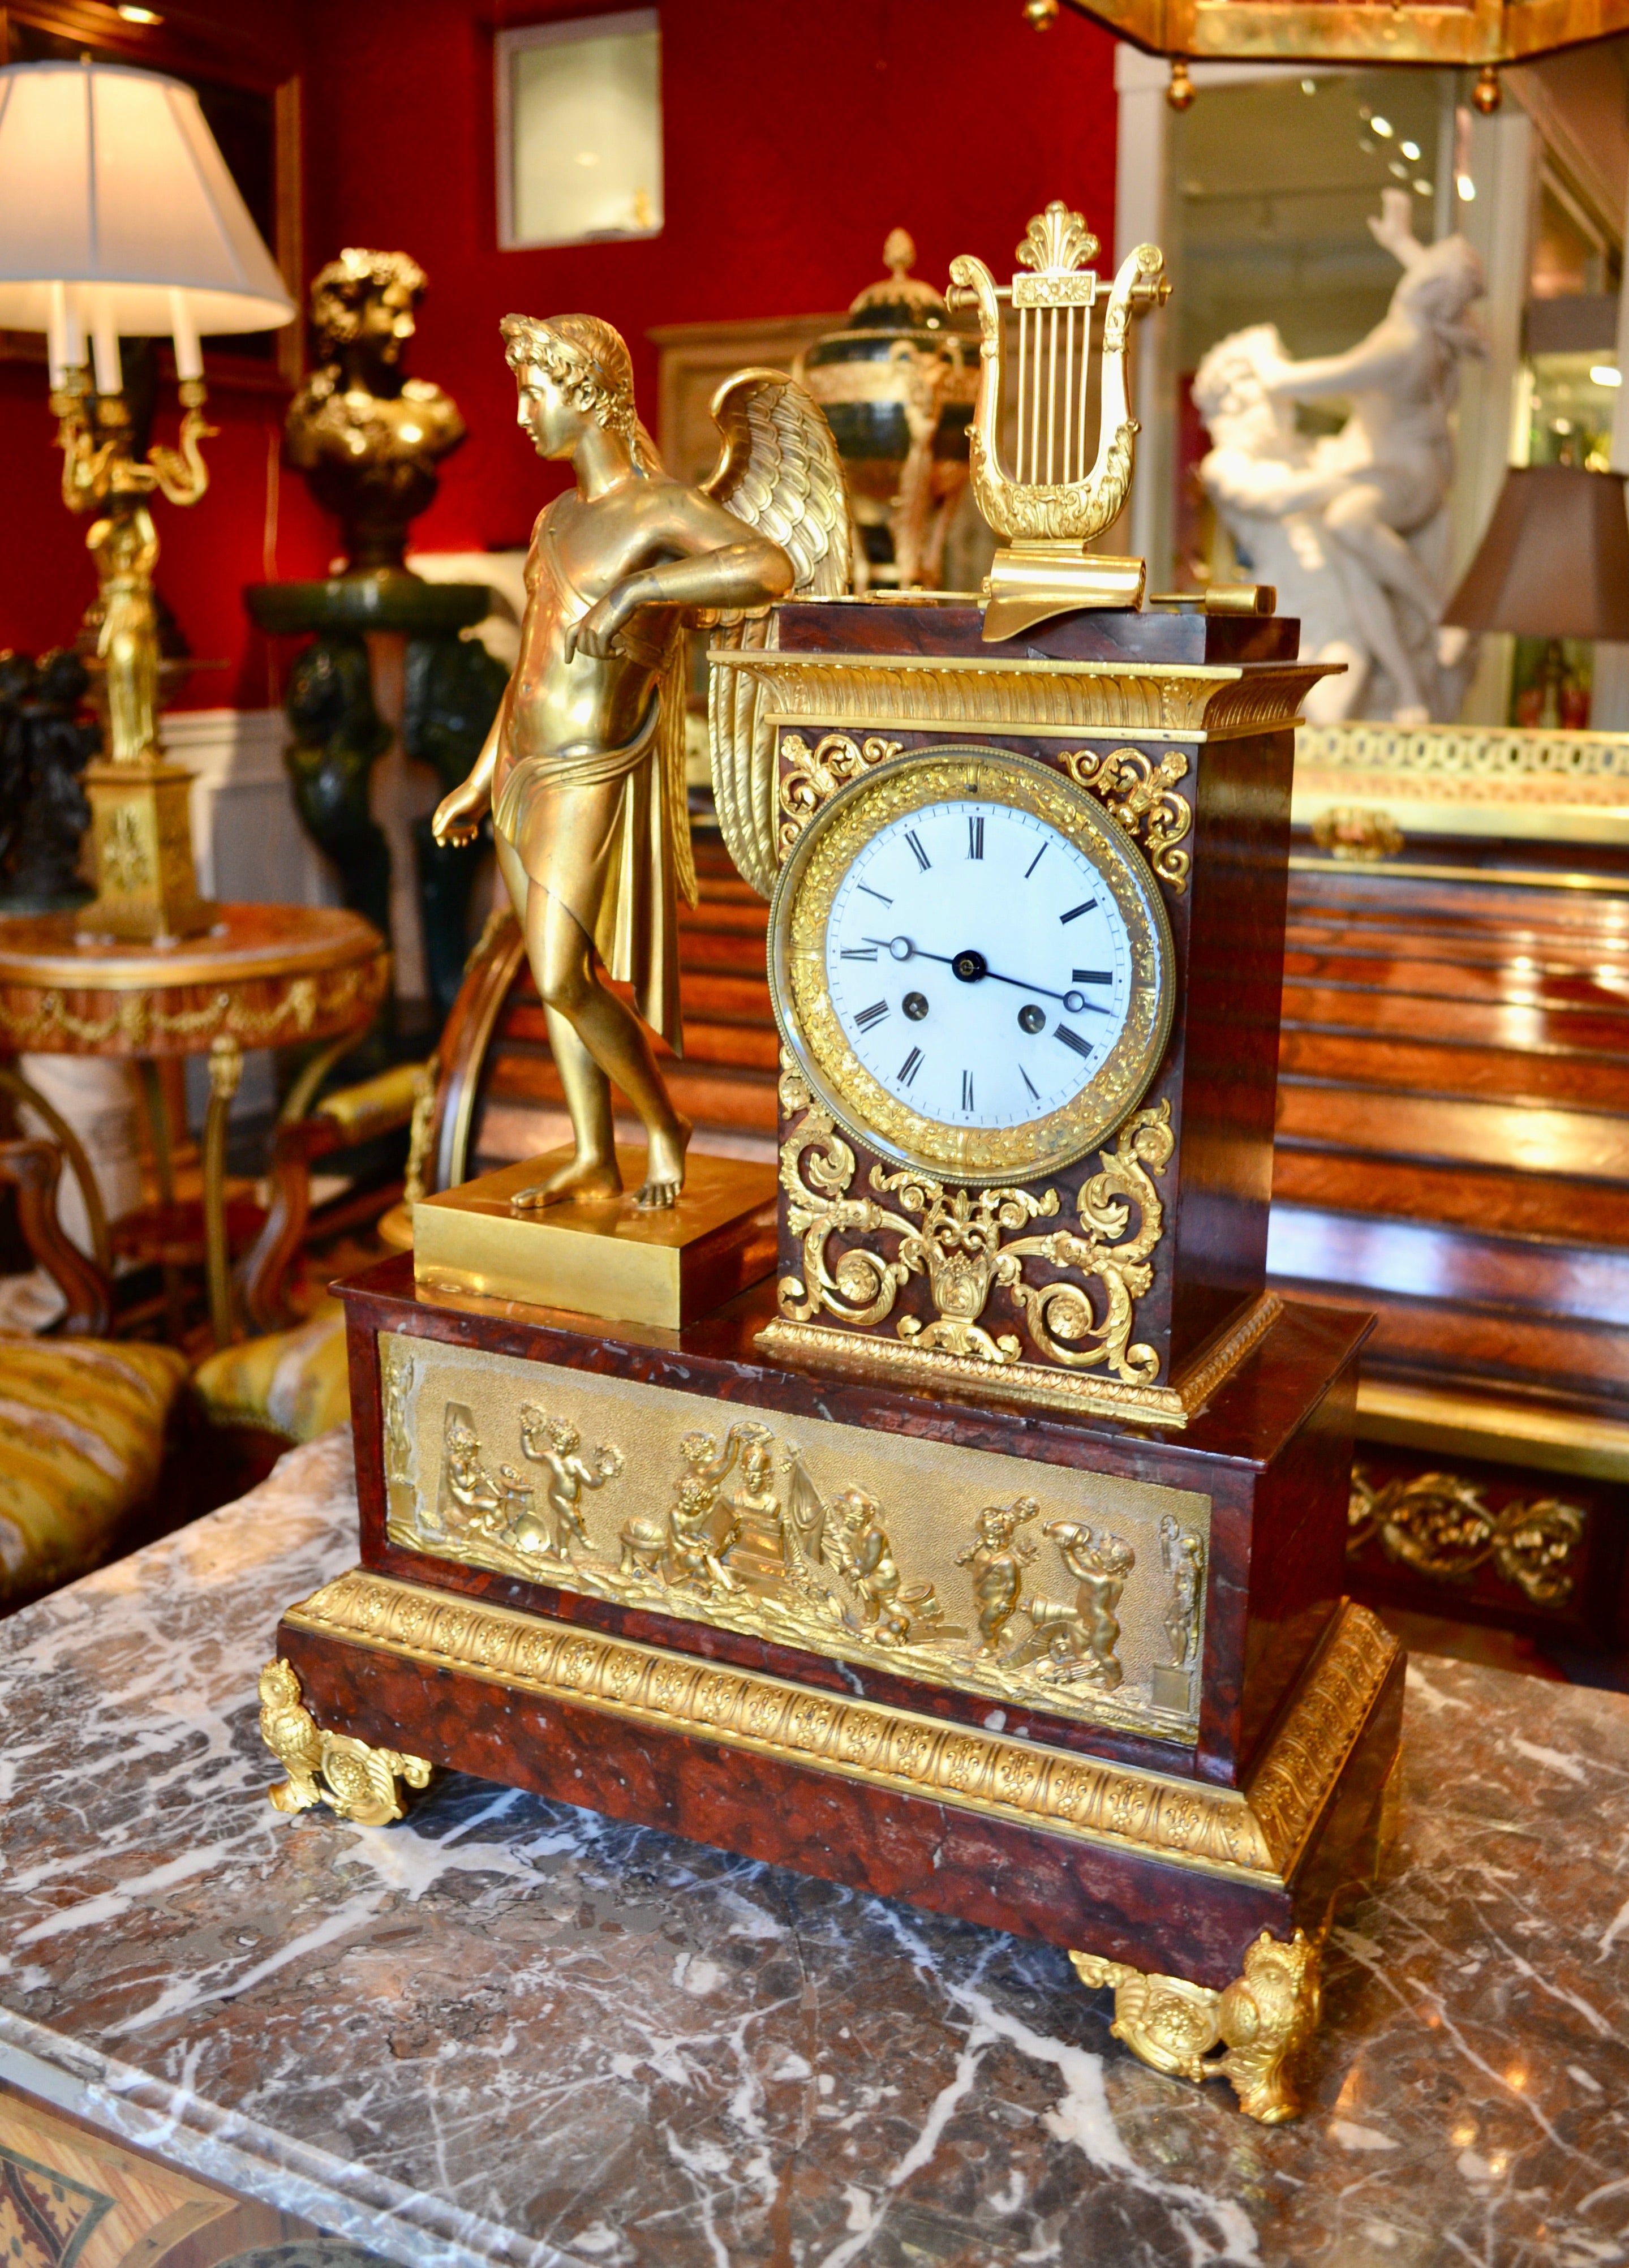 A gilt bronze and griotte marble French Empire clock depicting  Apollo Greek God of Music Art Literature and Sciences. The clock shows a a gilt bronze winged figure of Apollo leaning against a griotte marble altar pedestal decorated with gilt bronze